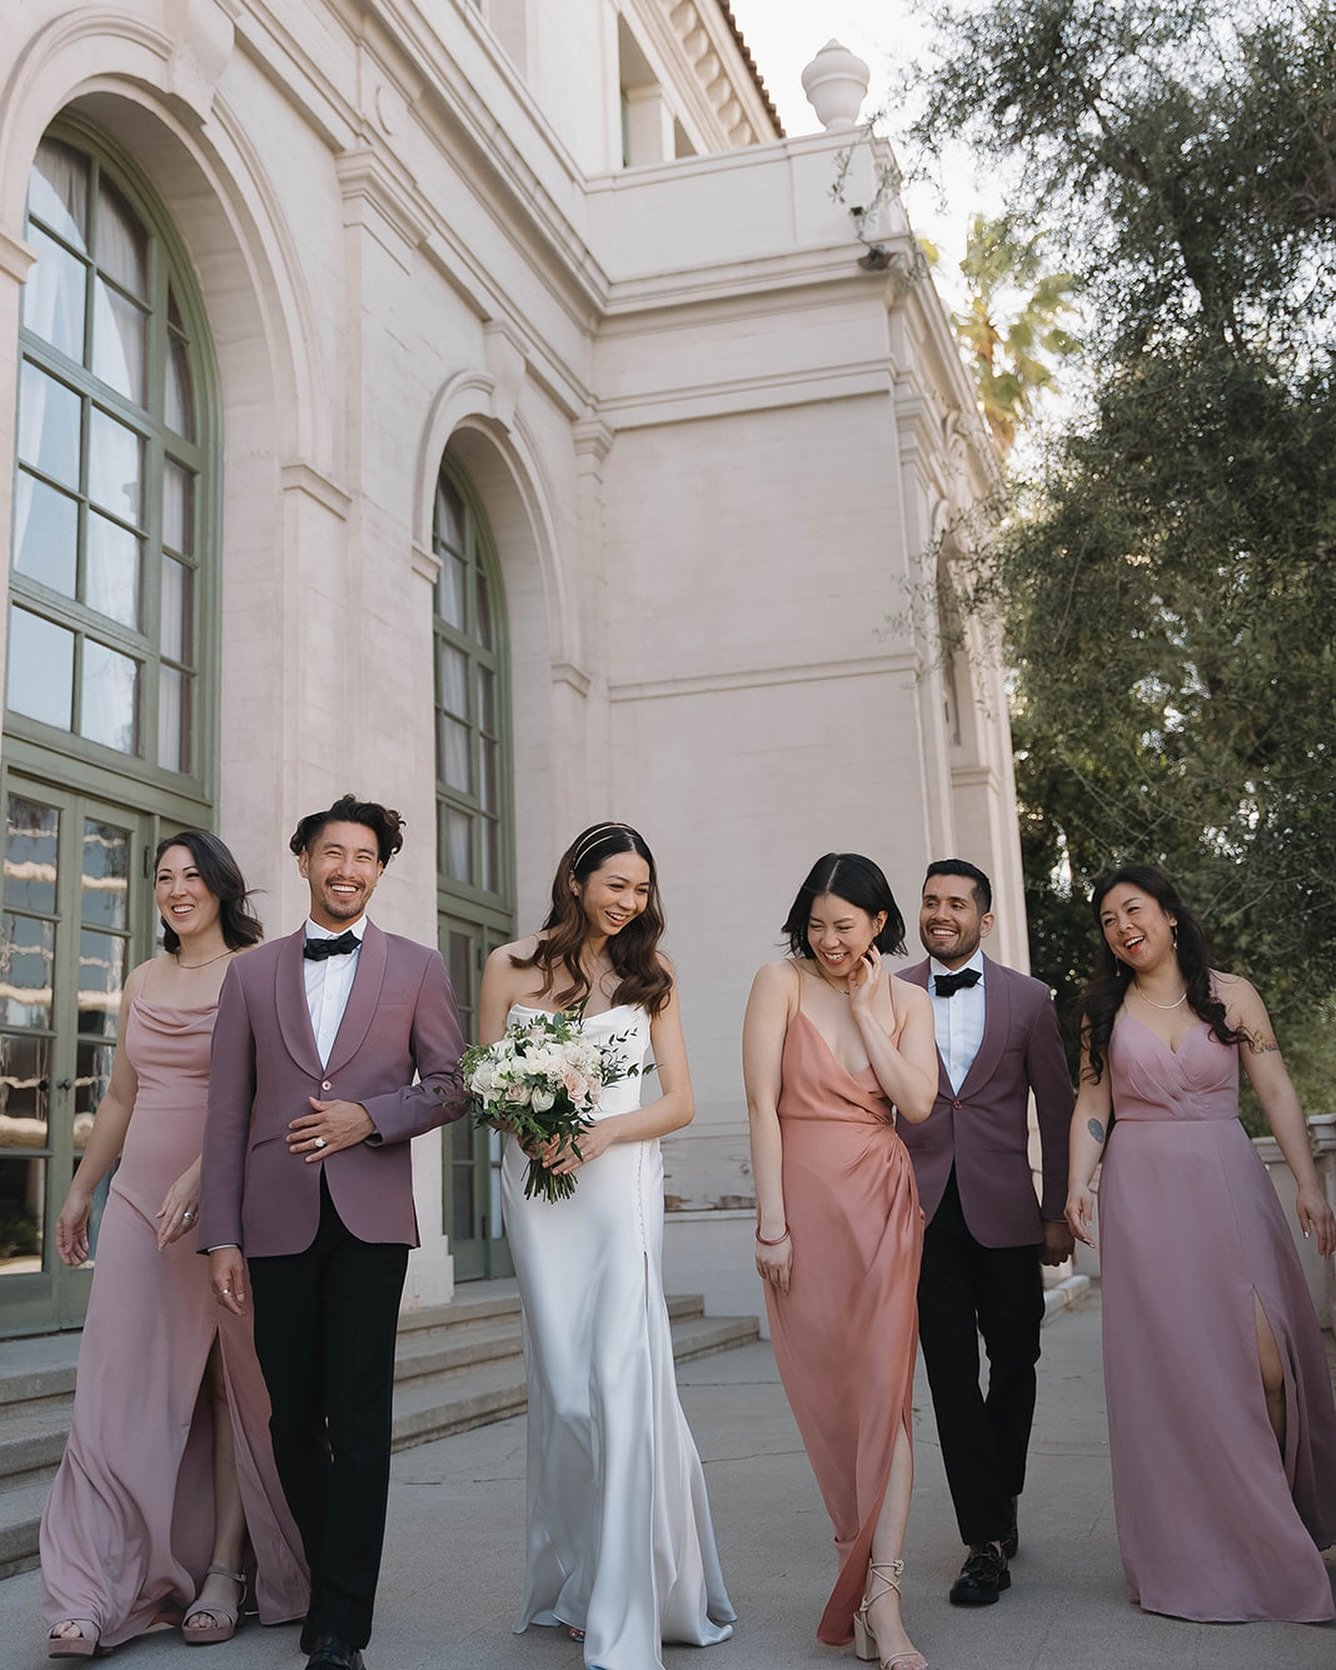 I couldn&rsquo;t say I DO💍, without you🤍
Christina&rsquo;s Bridal Squad is Goals!🫰🏻✨

Venue: @ebellevents 
Photographer + Videographer: @titusandjo 
Wedding Planner: @bestdayeverla_events 
Florist: @flowerduetla

#ebell #theebell #theebellofla #e